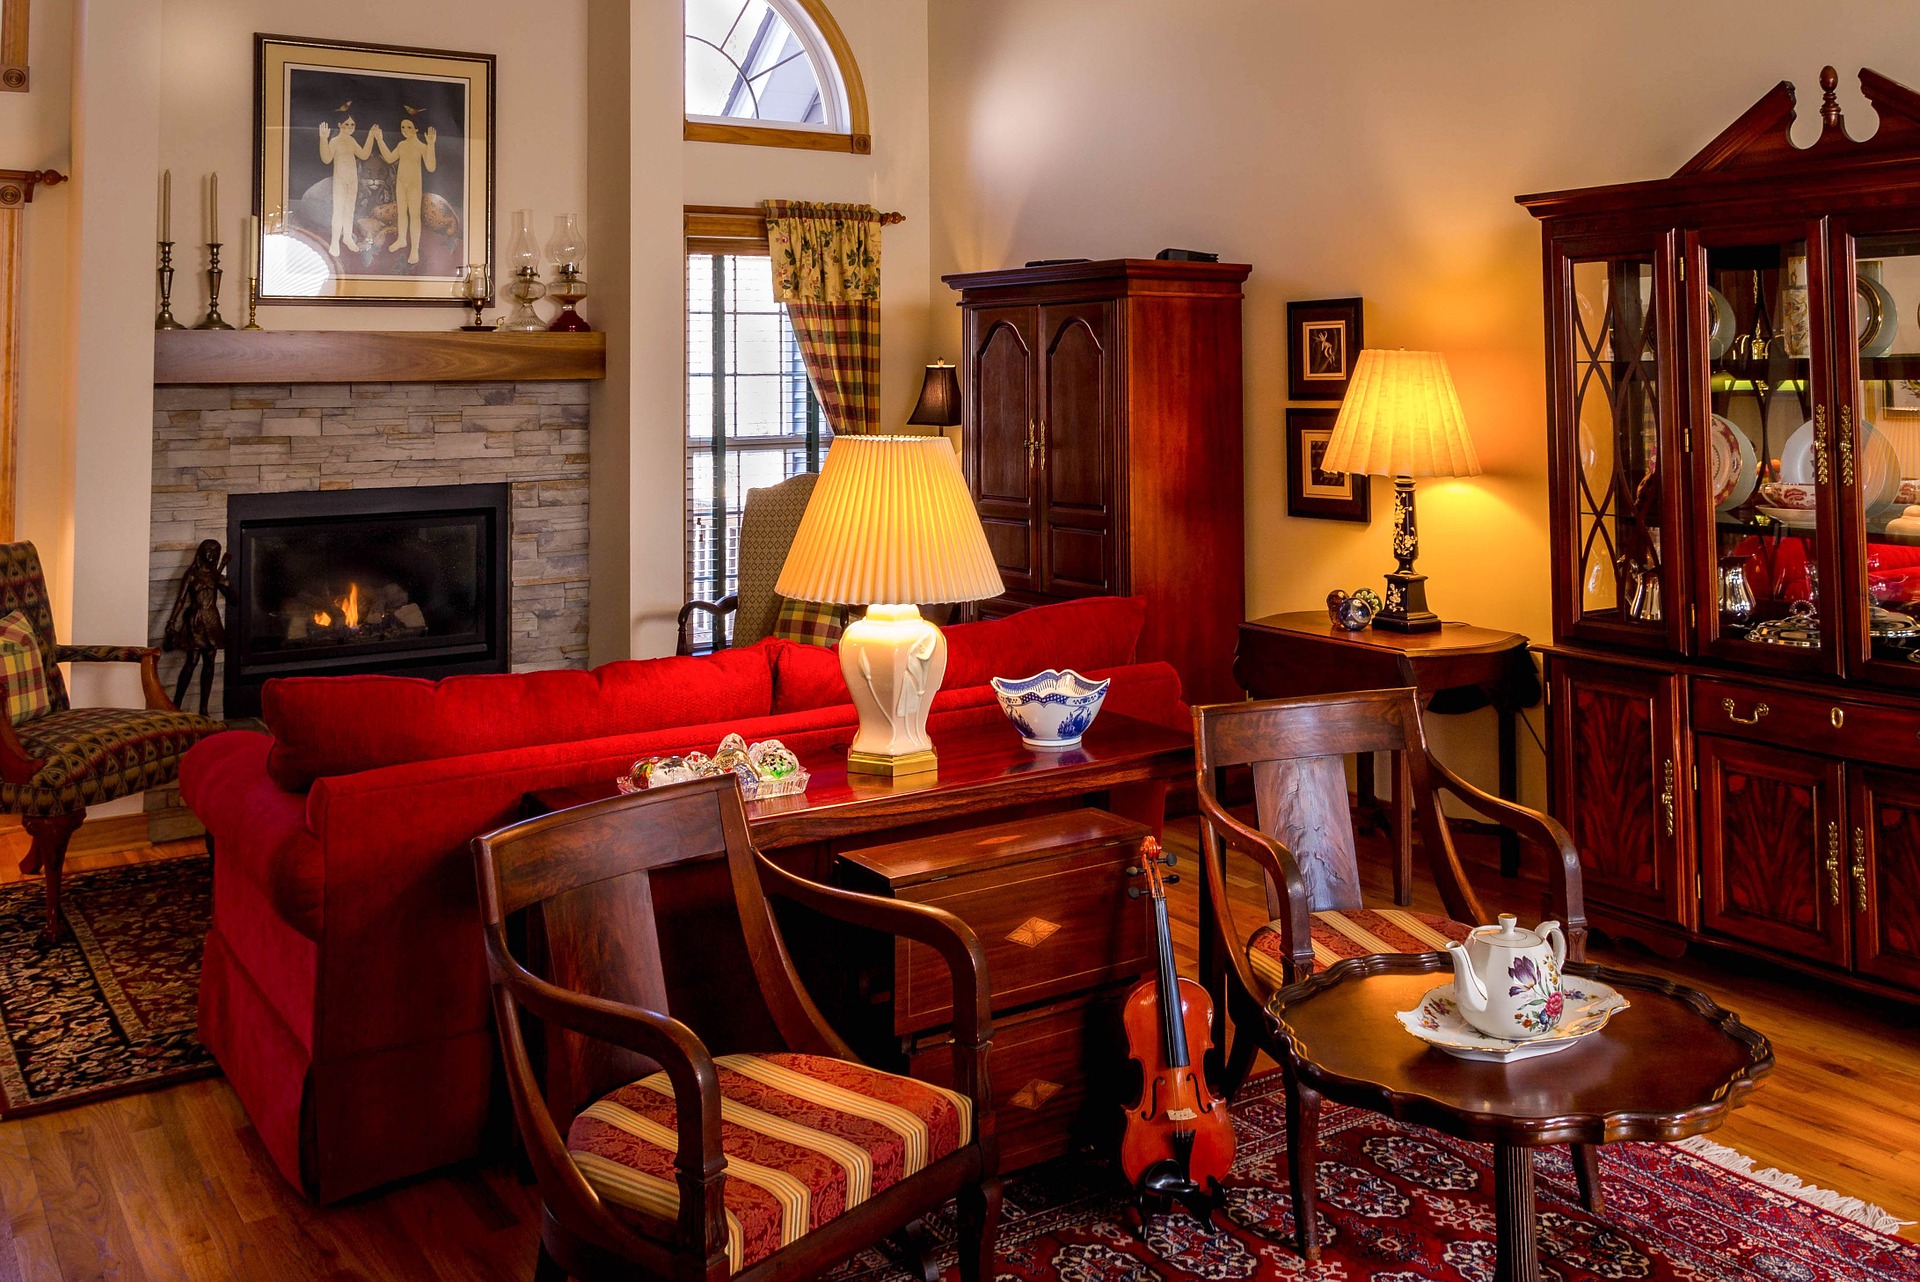 Antique furniture in a family room